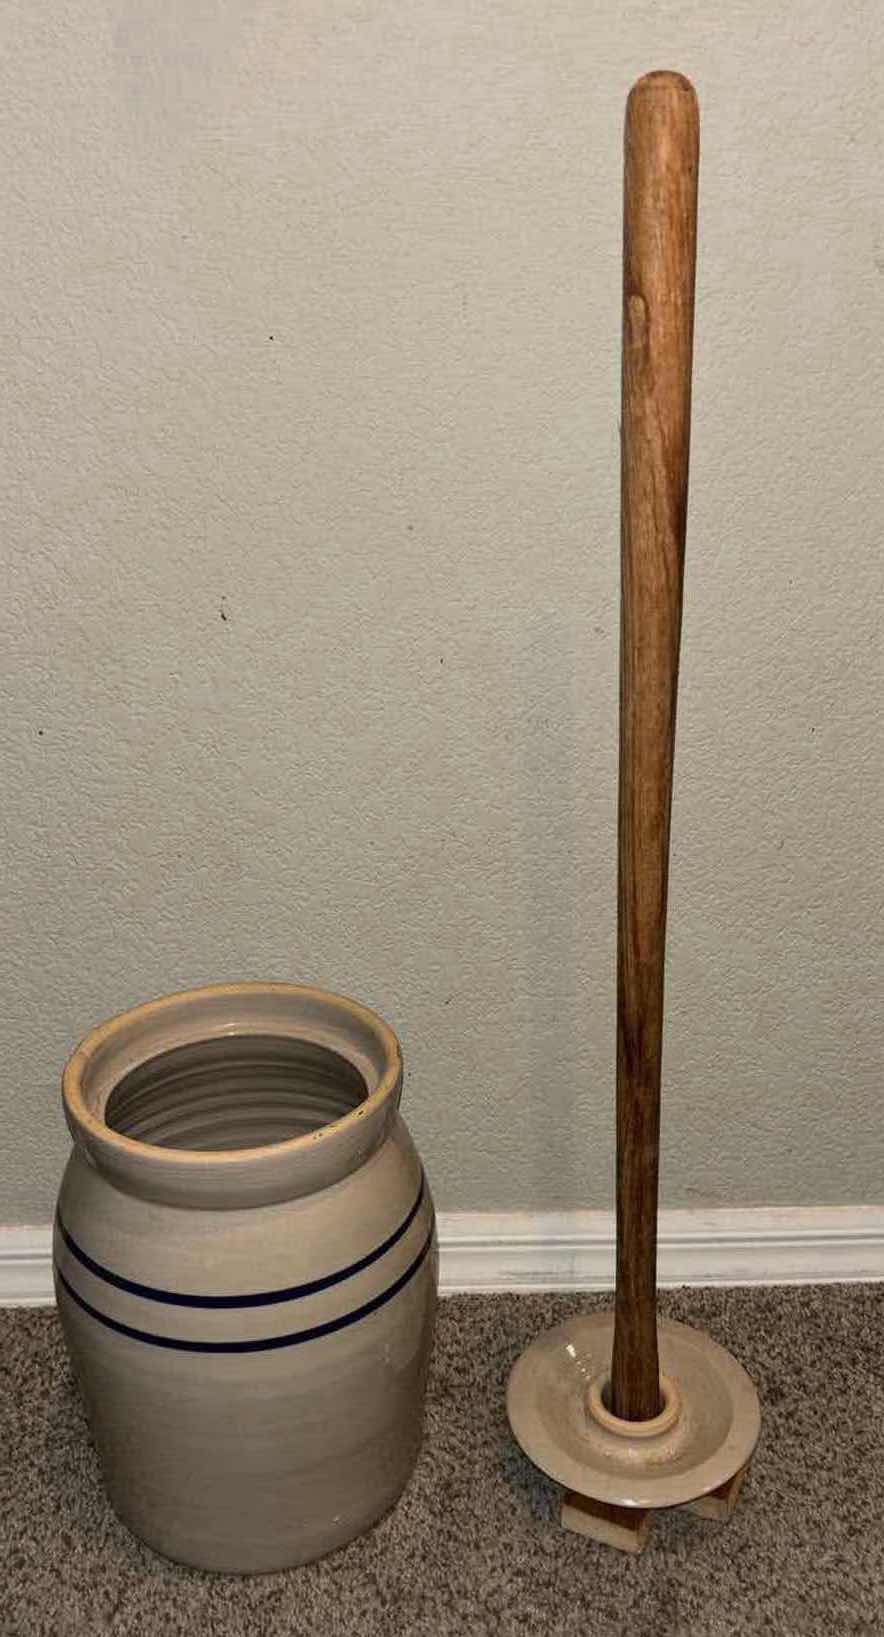 Photo 2 of VINTAGE HAND-TURNED BUTTER CHURN, STONEWARE DASHER STYLE, 2 GALLON